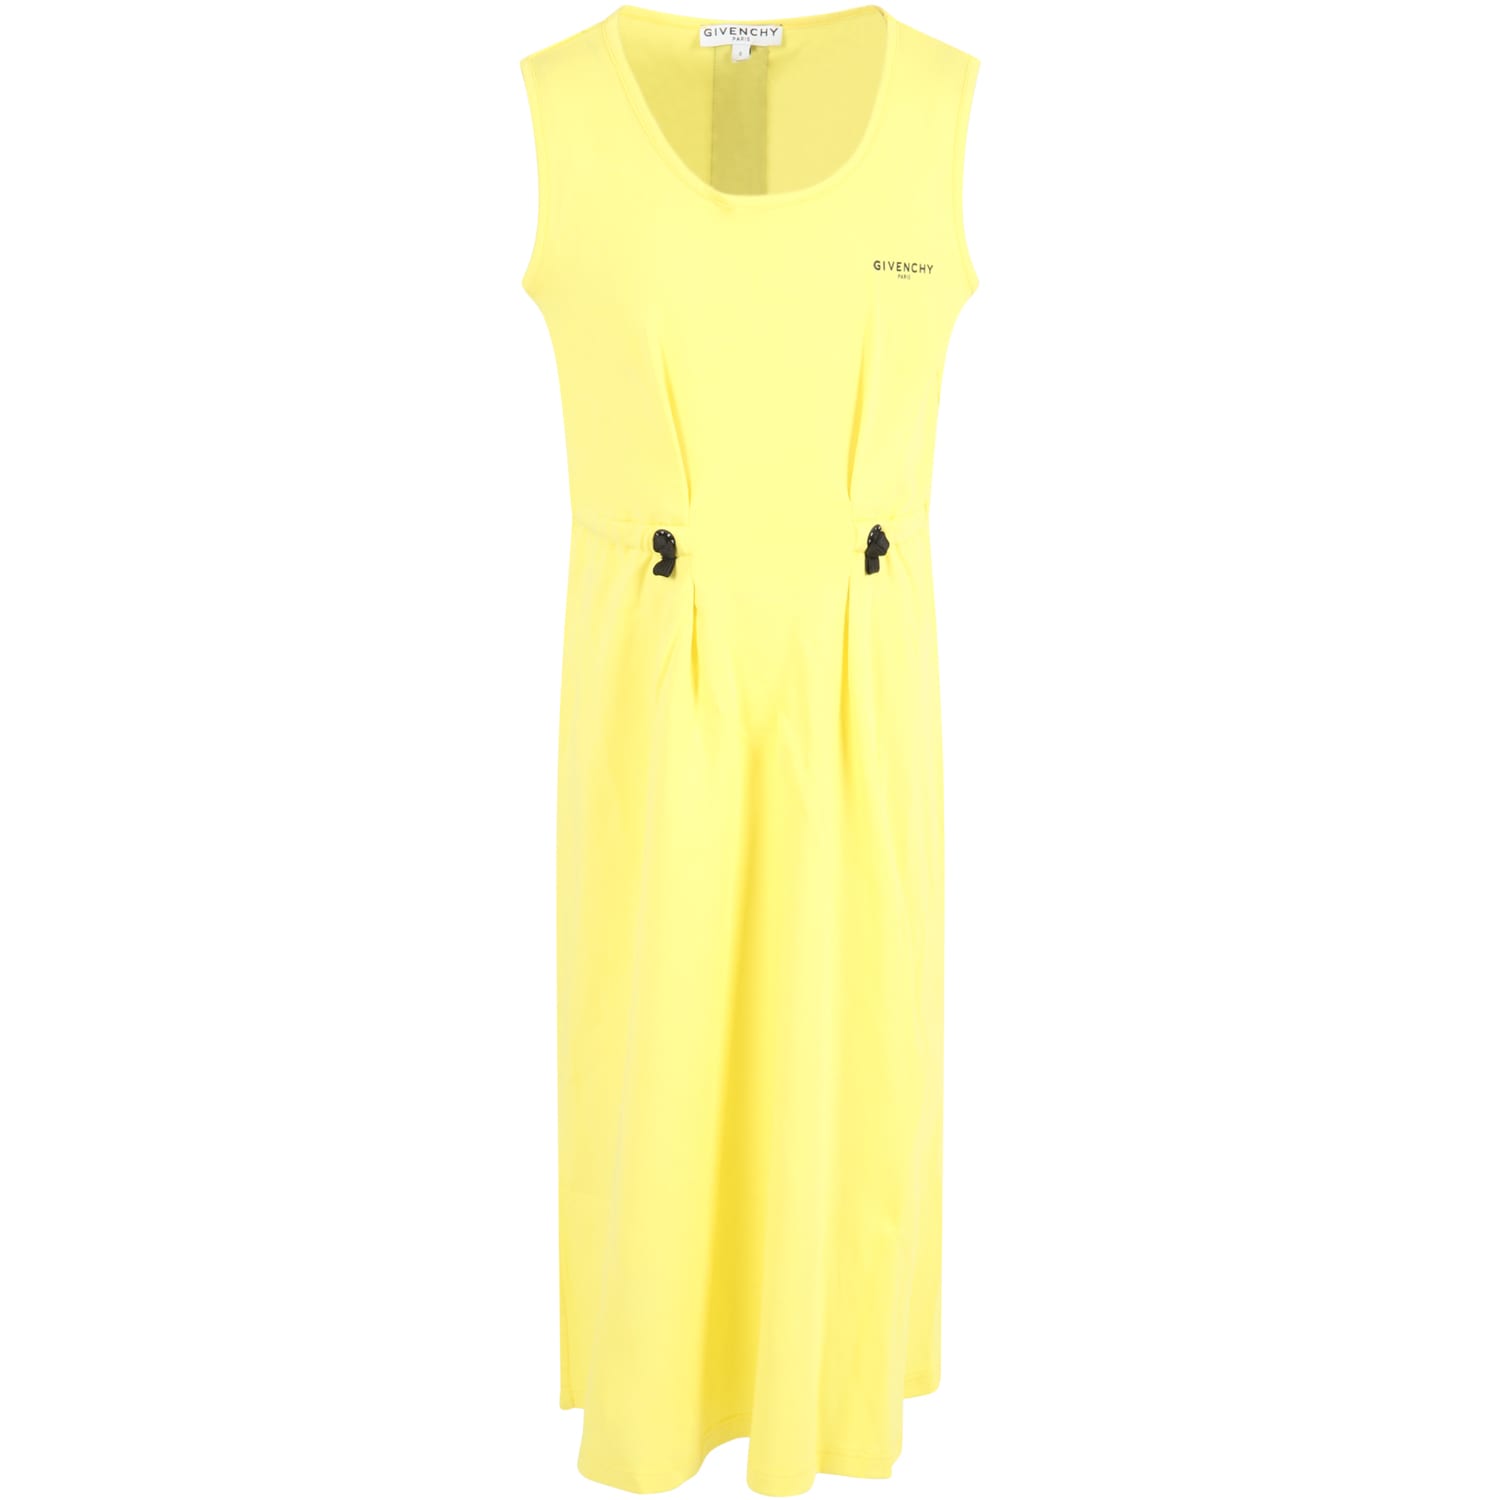 GIVENCHY YELLOW DRESS FOR GIRL WITH LOGO,H12151 508